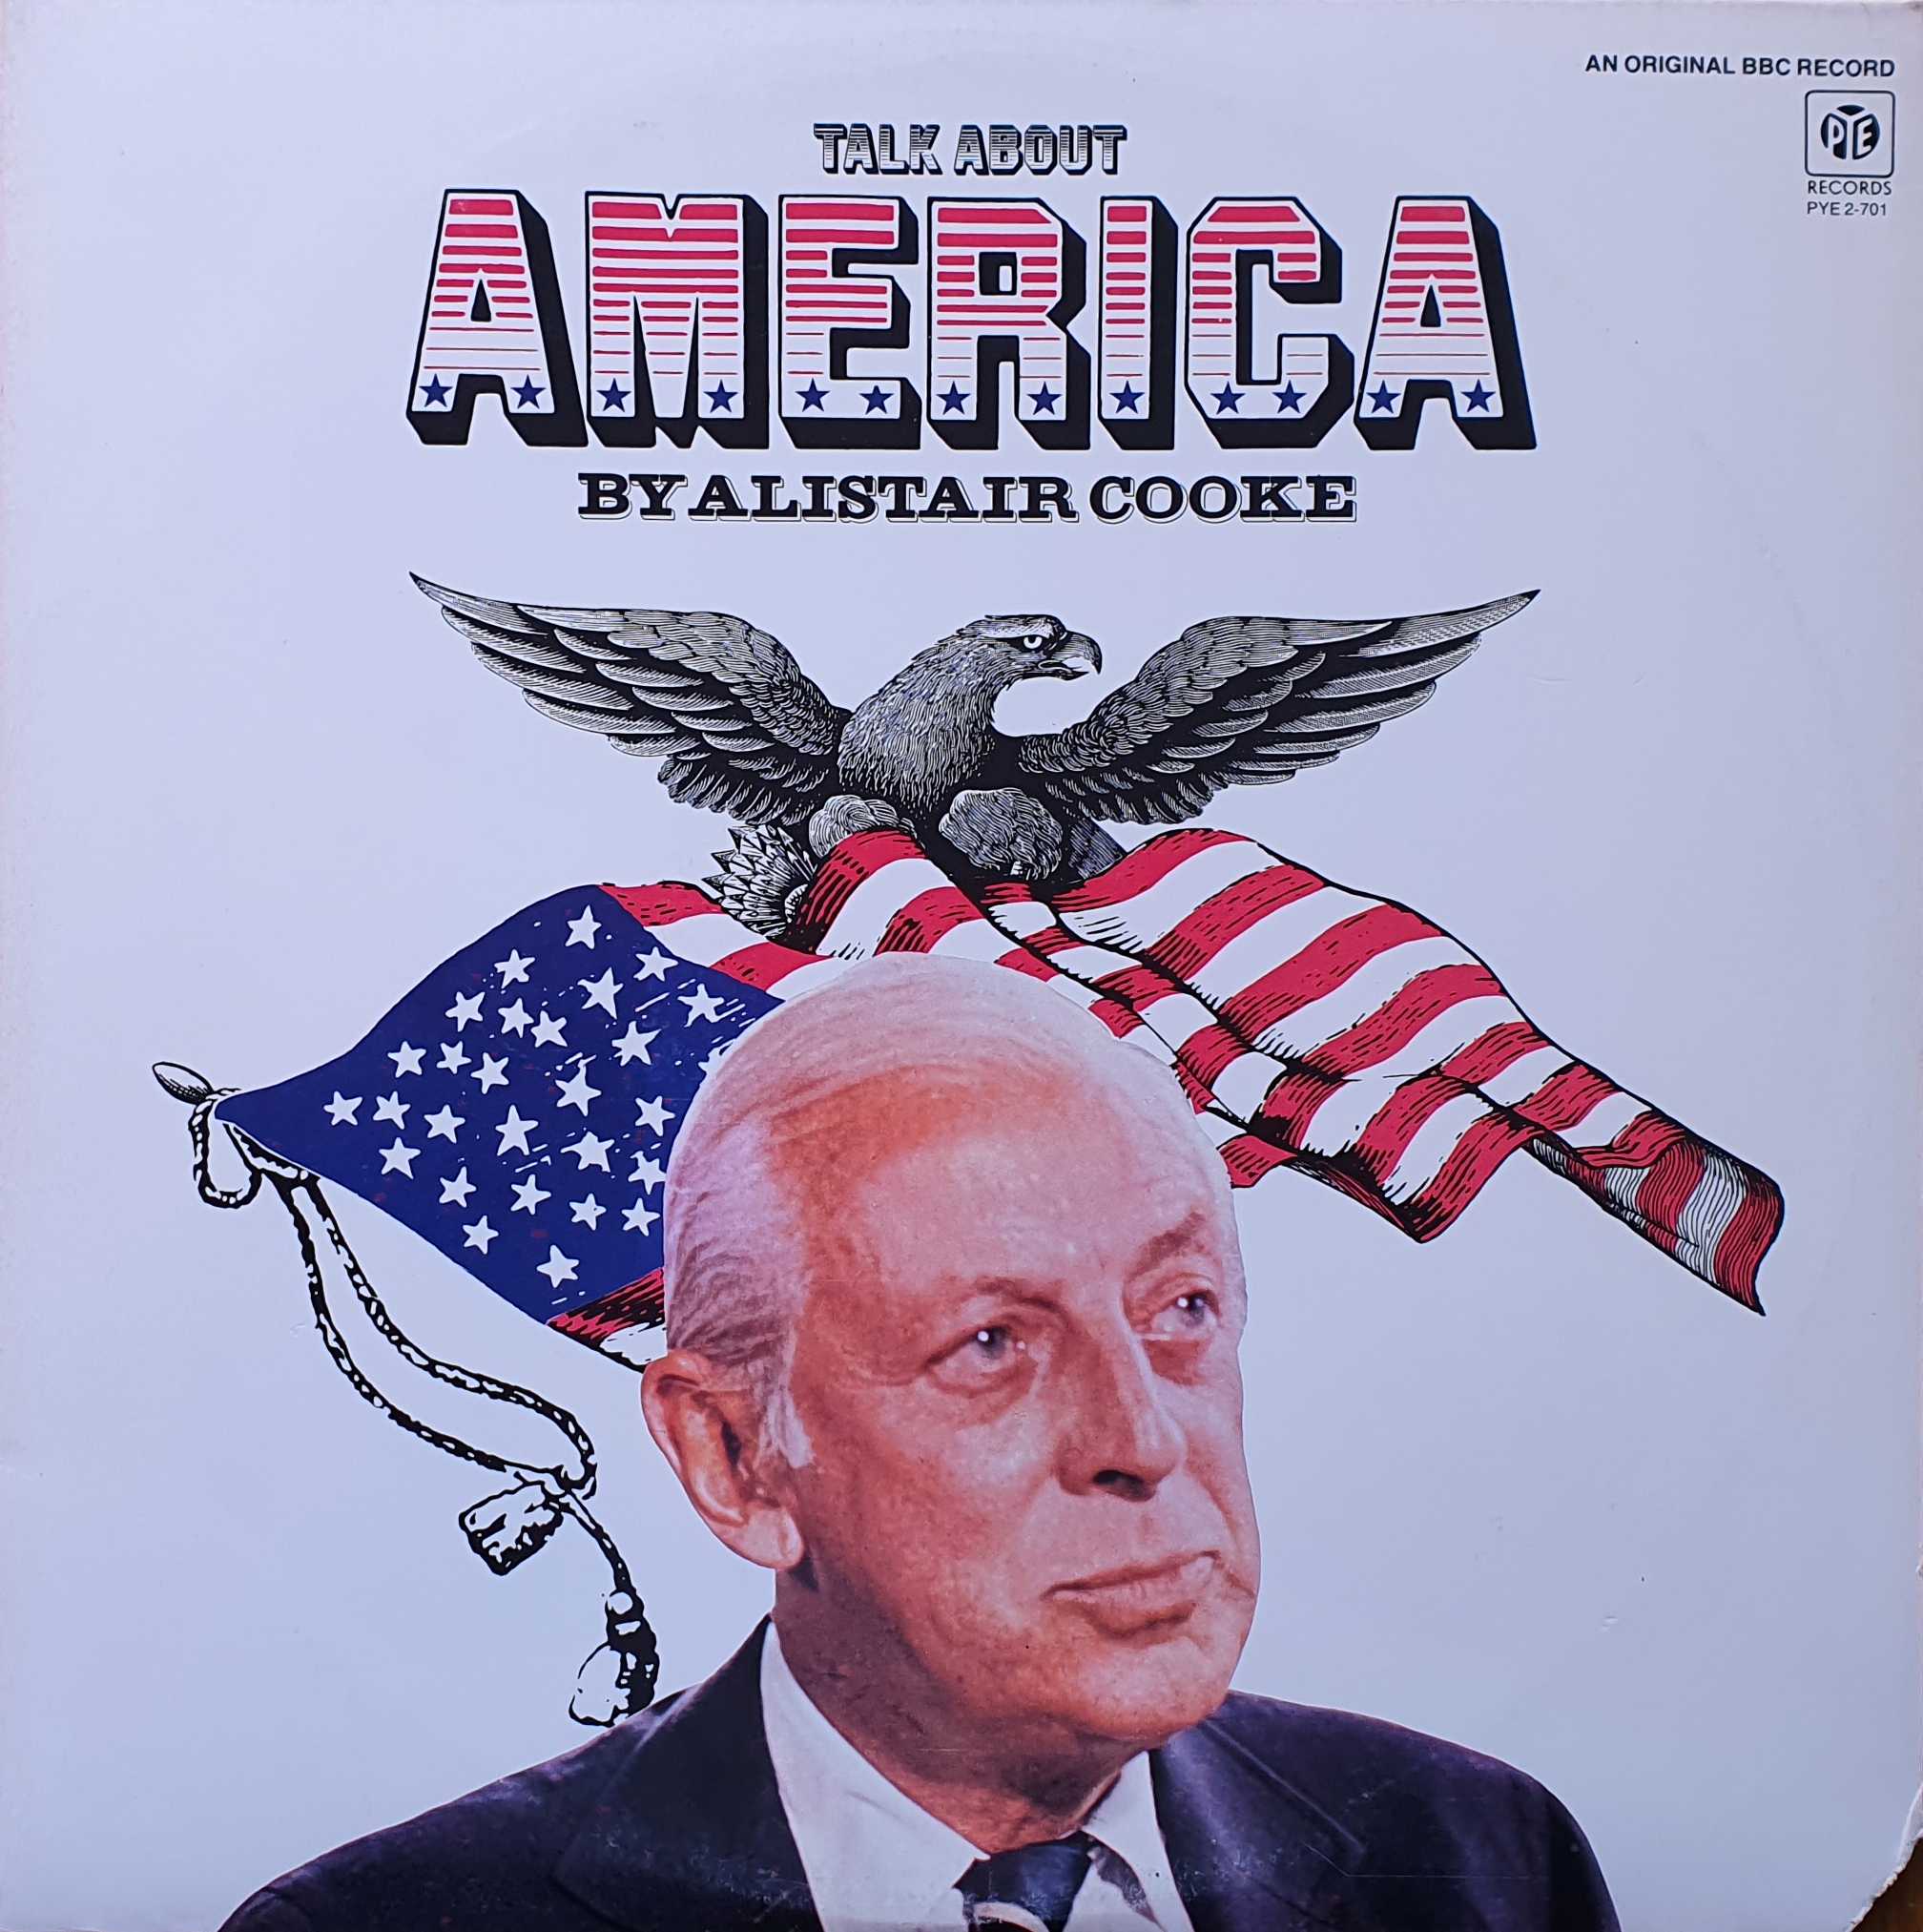 Picture of PYE 2-701 Talk about America (US import) by artist Alistair Cooke from the BBC albums - Records and Tapes library